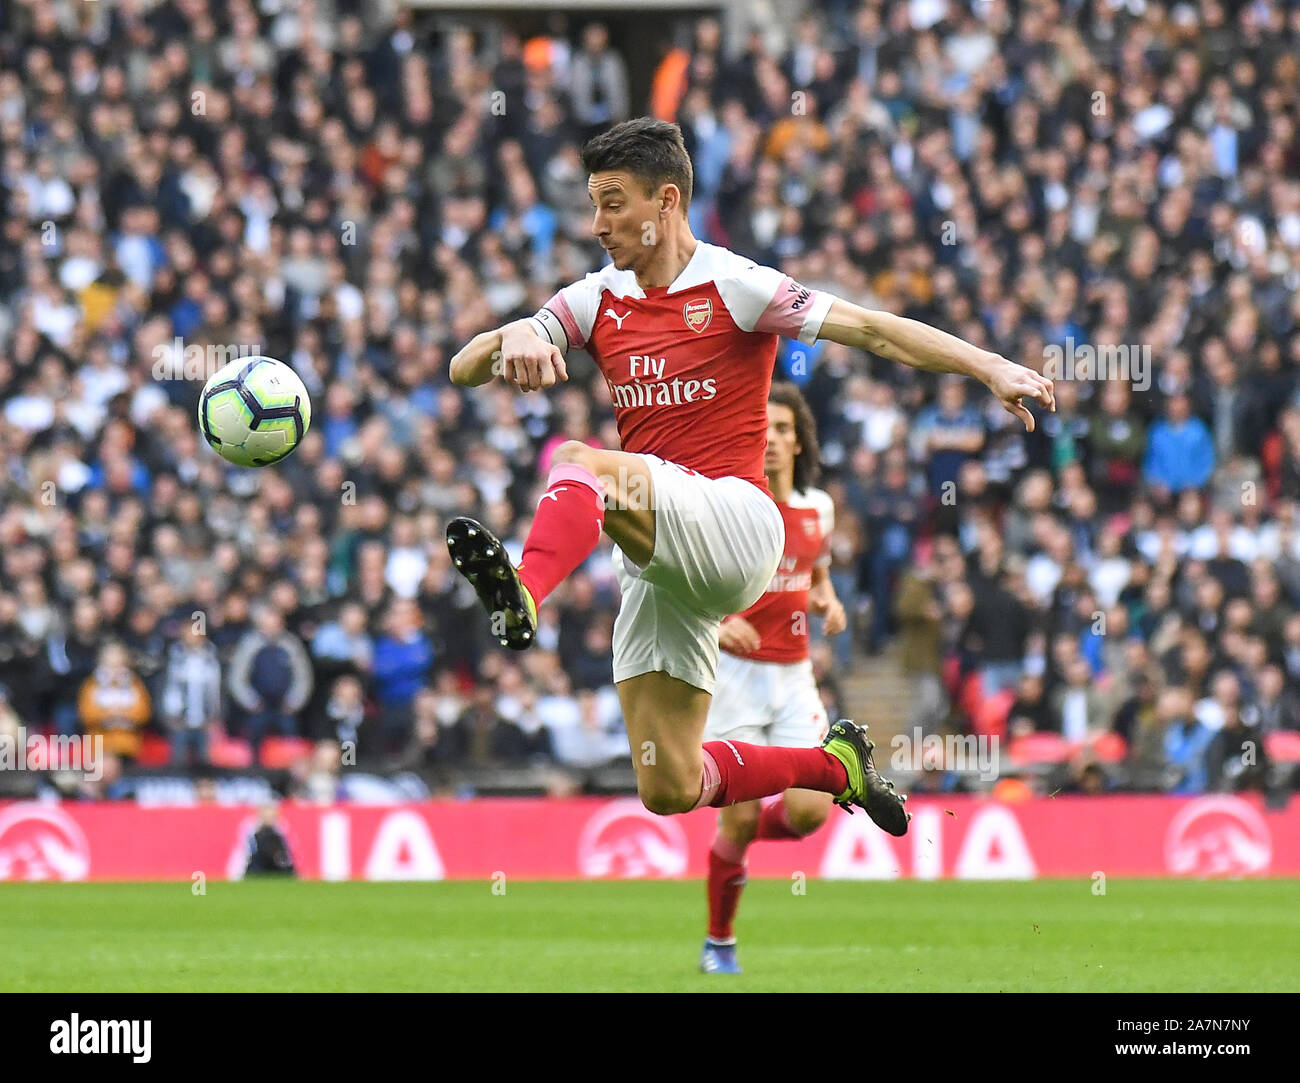 LONDON, ENGLAND - MARCH 2, 2019: Laurent Koscielny of Arsenal pictured during the 2018/19 Premier League game between Tottenham Hotspur and Arsenal FC at Wembley Stadium. Stock Photo